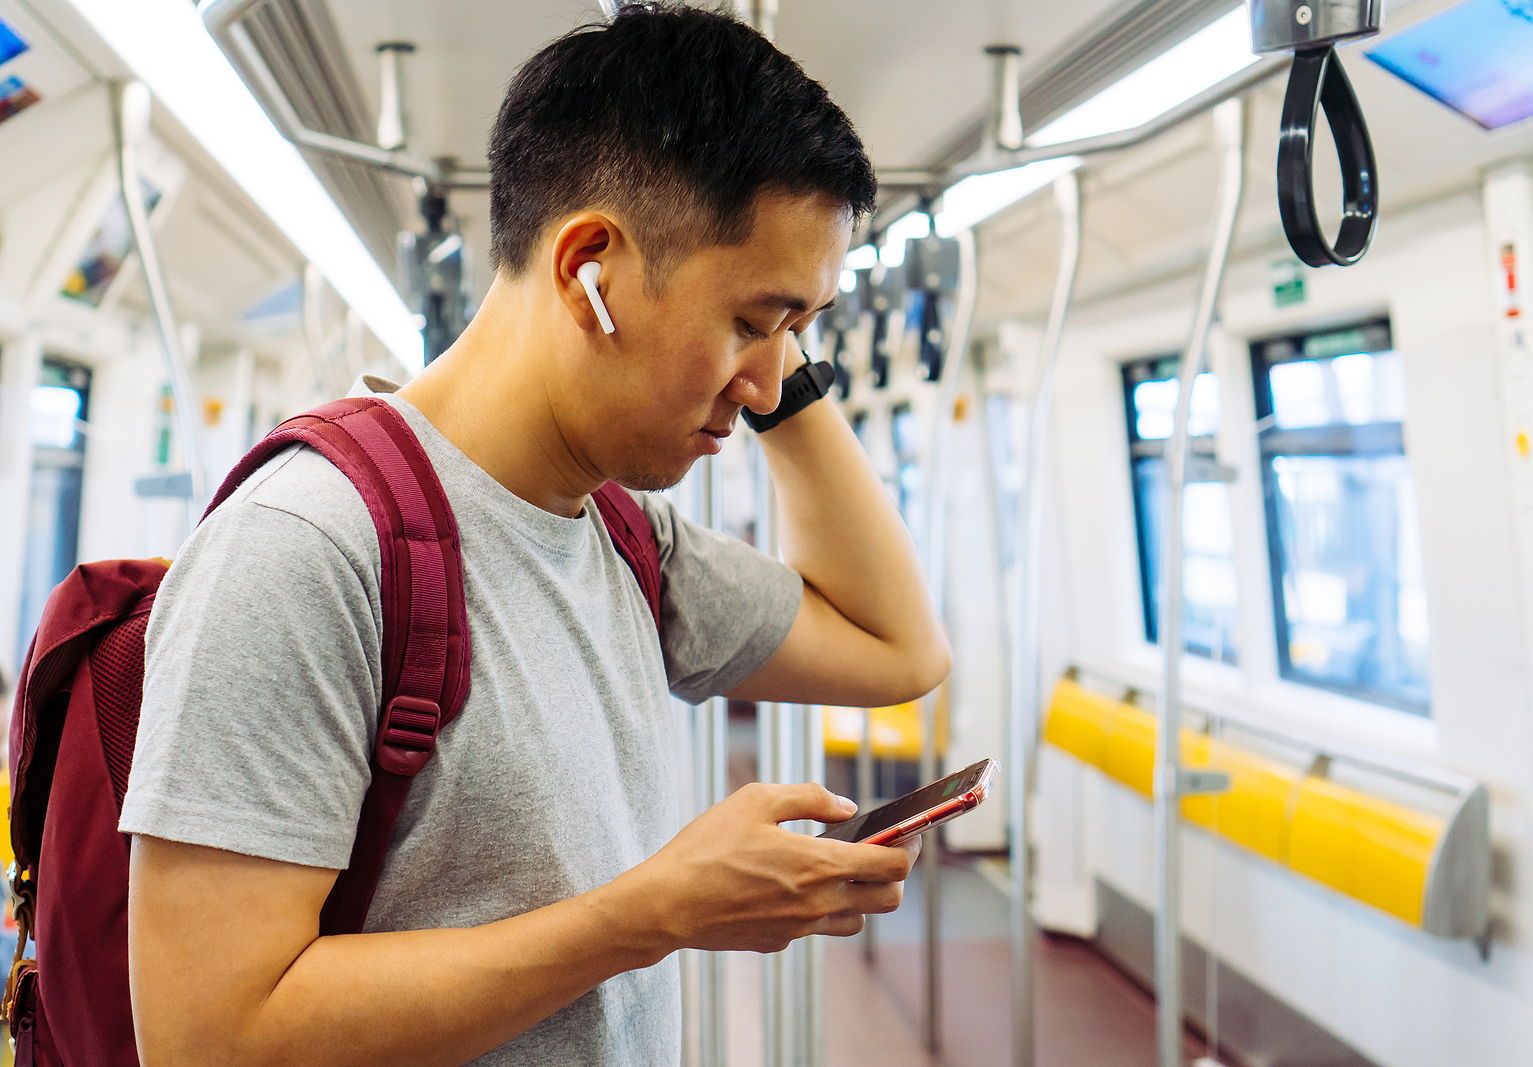 An asian man looks down on his phone while riding the subway and with headphones.